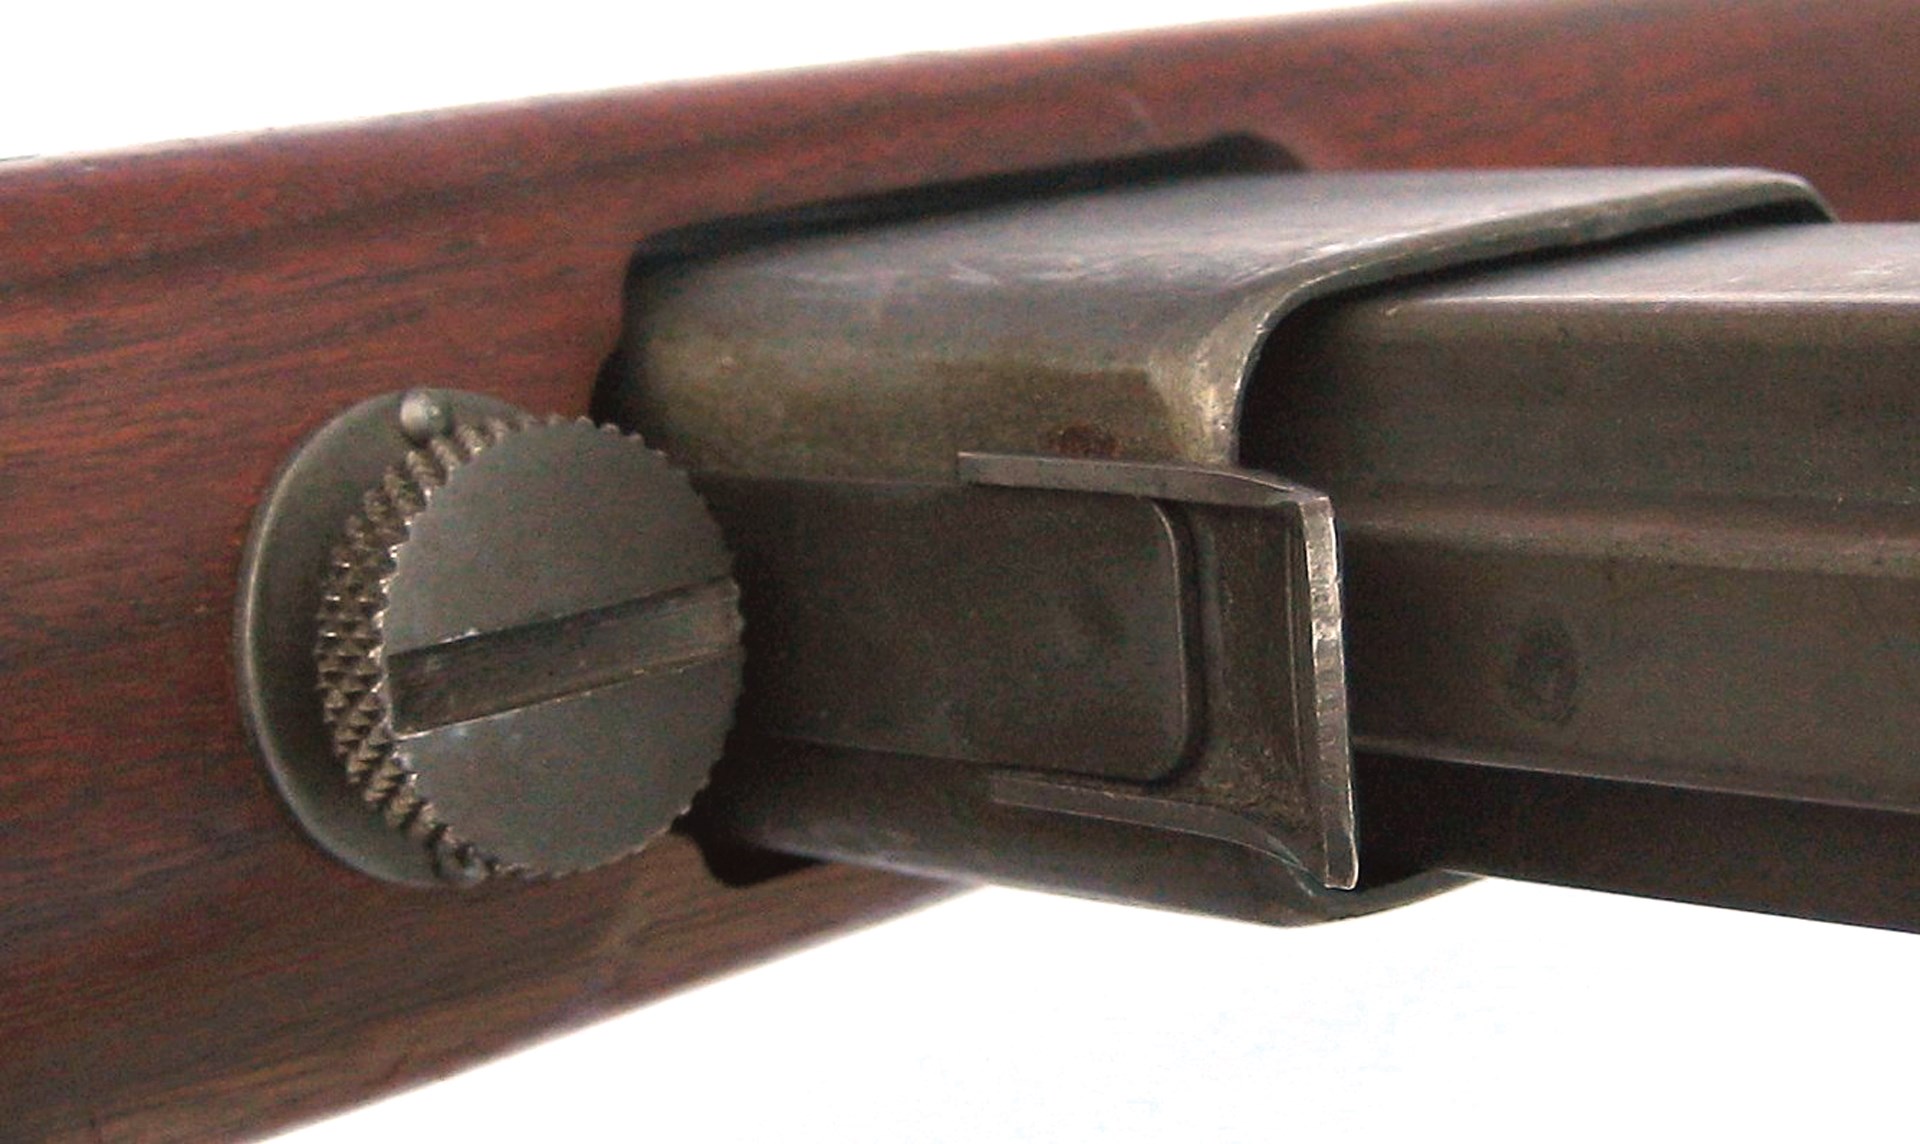 The Reising’s stock could be quickly separated from the barreled-action by turning out a thumbscrew located behind the magazine well.